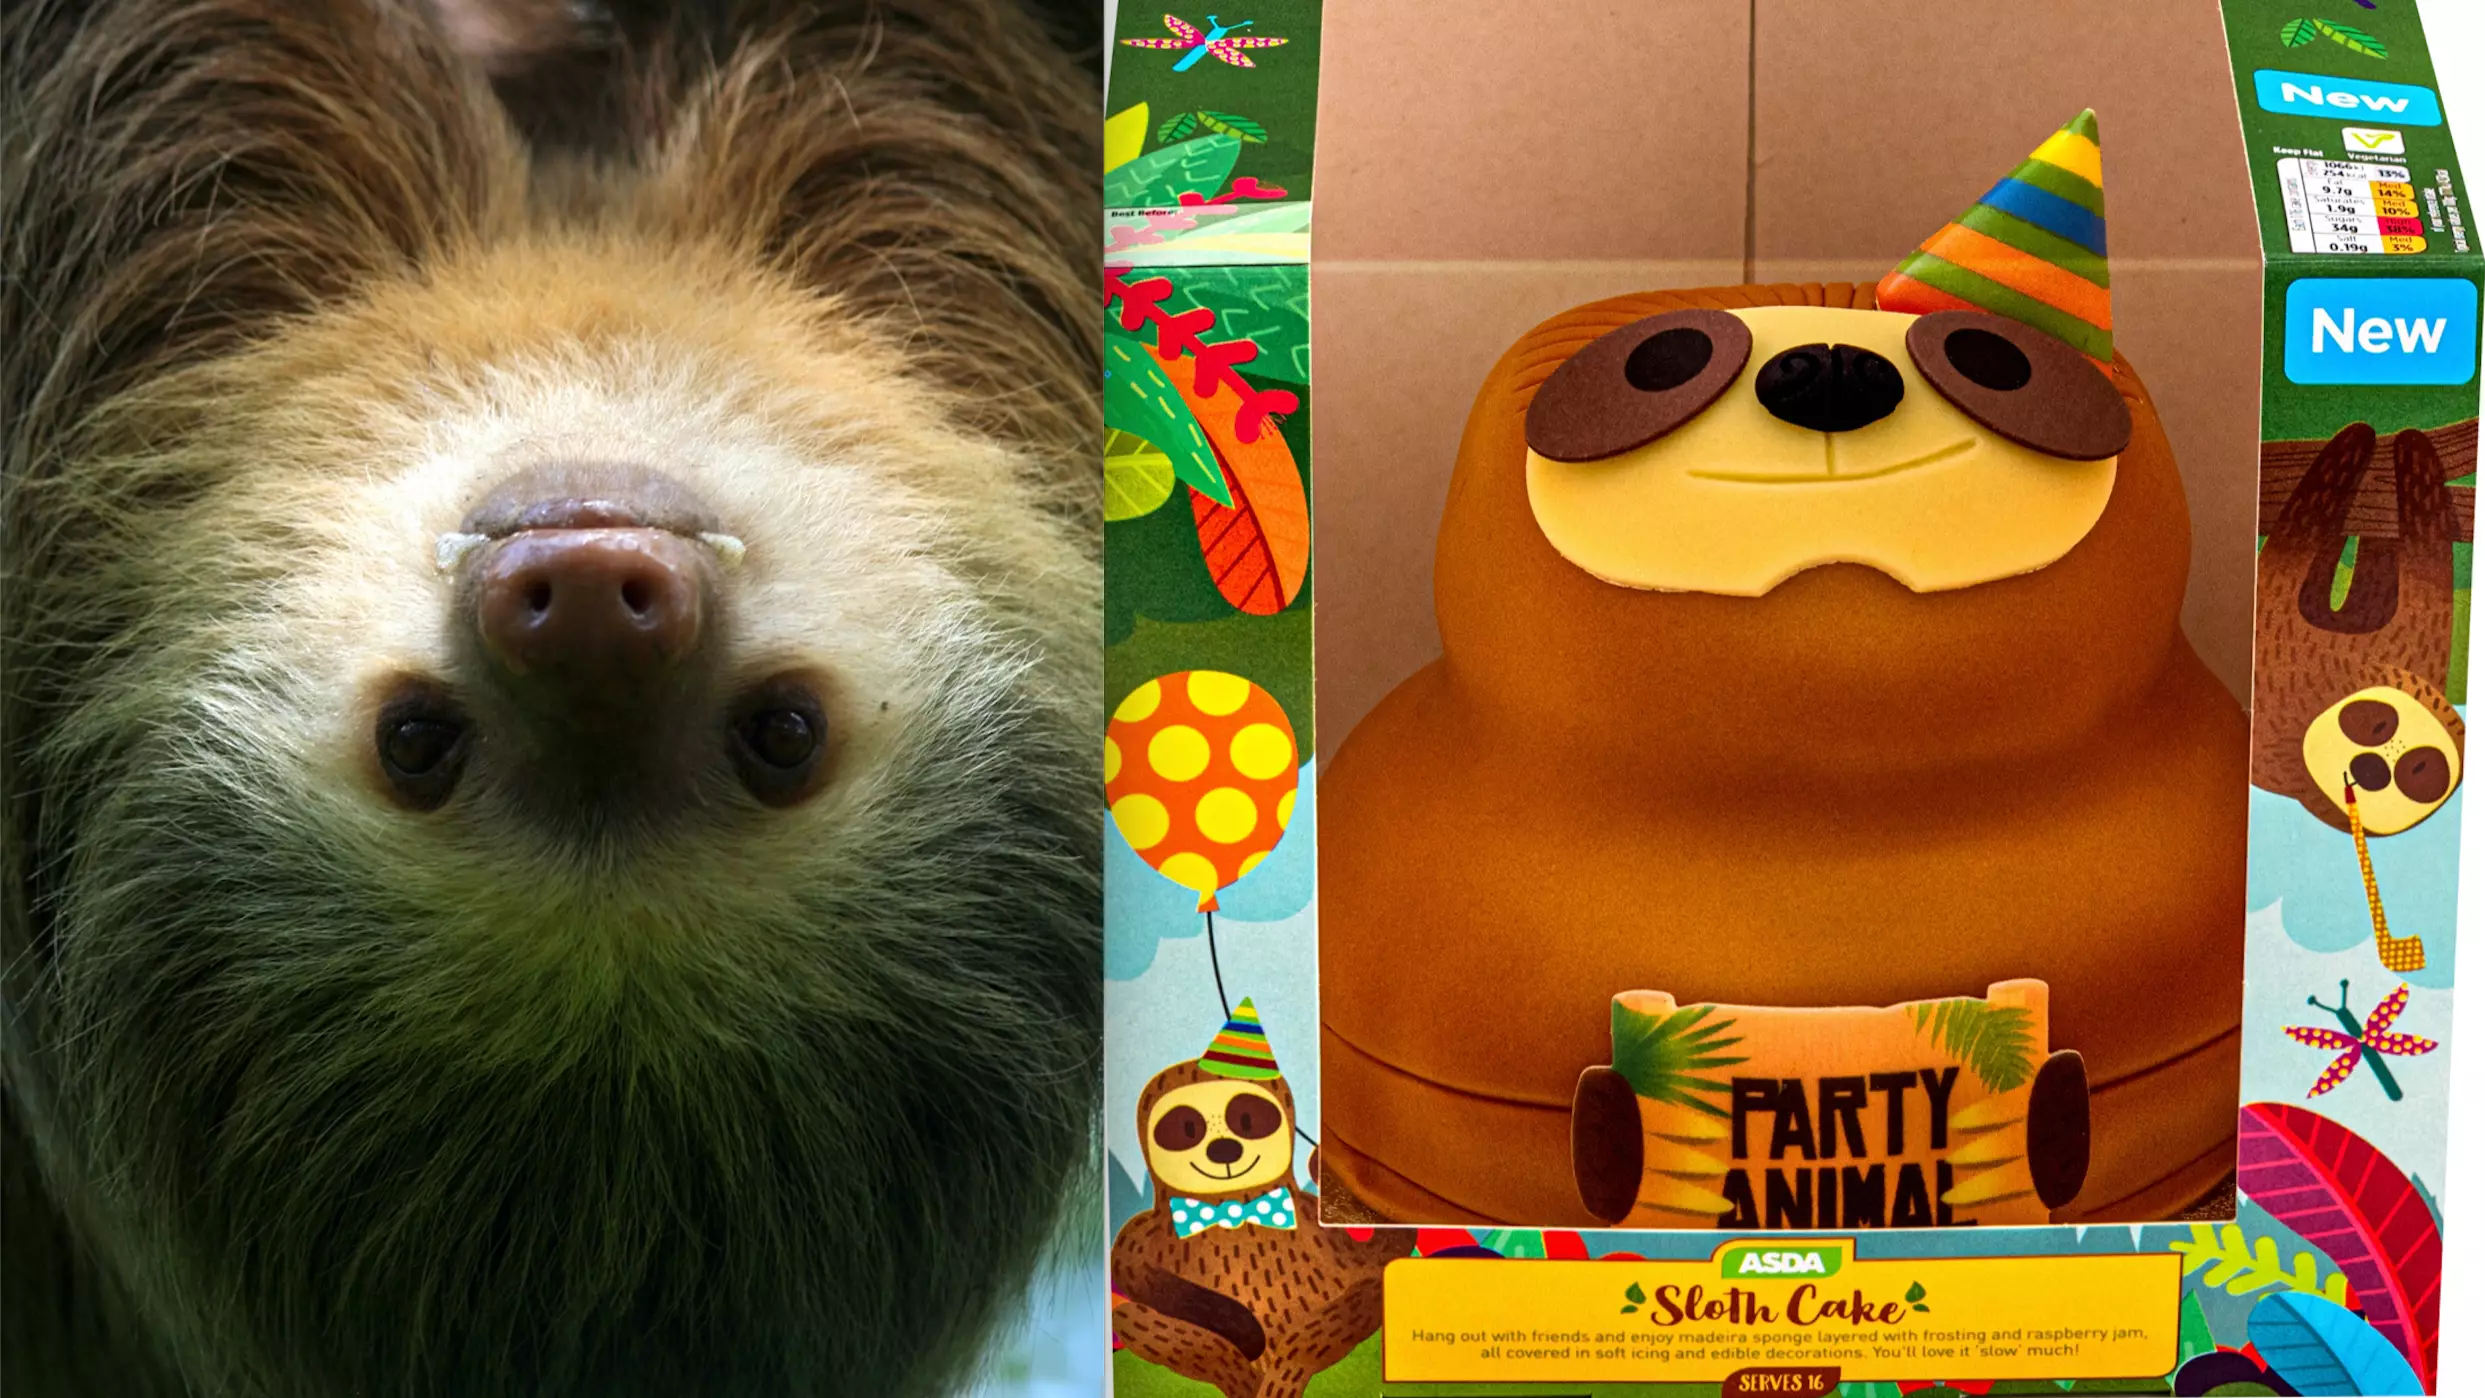 ASDA Has Launched A Sloth Cake And It’s Absolutely Adorable